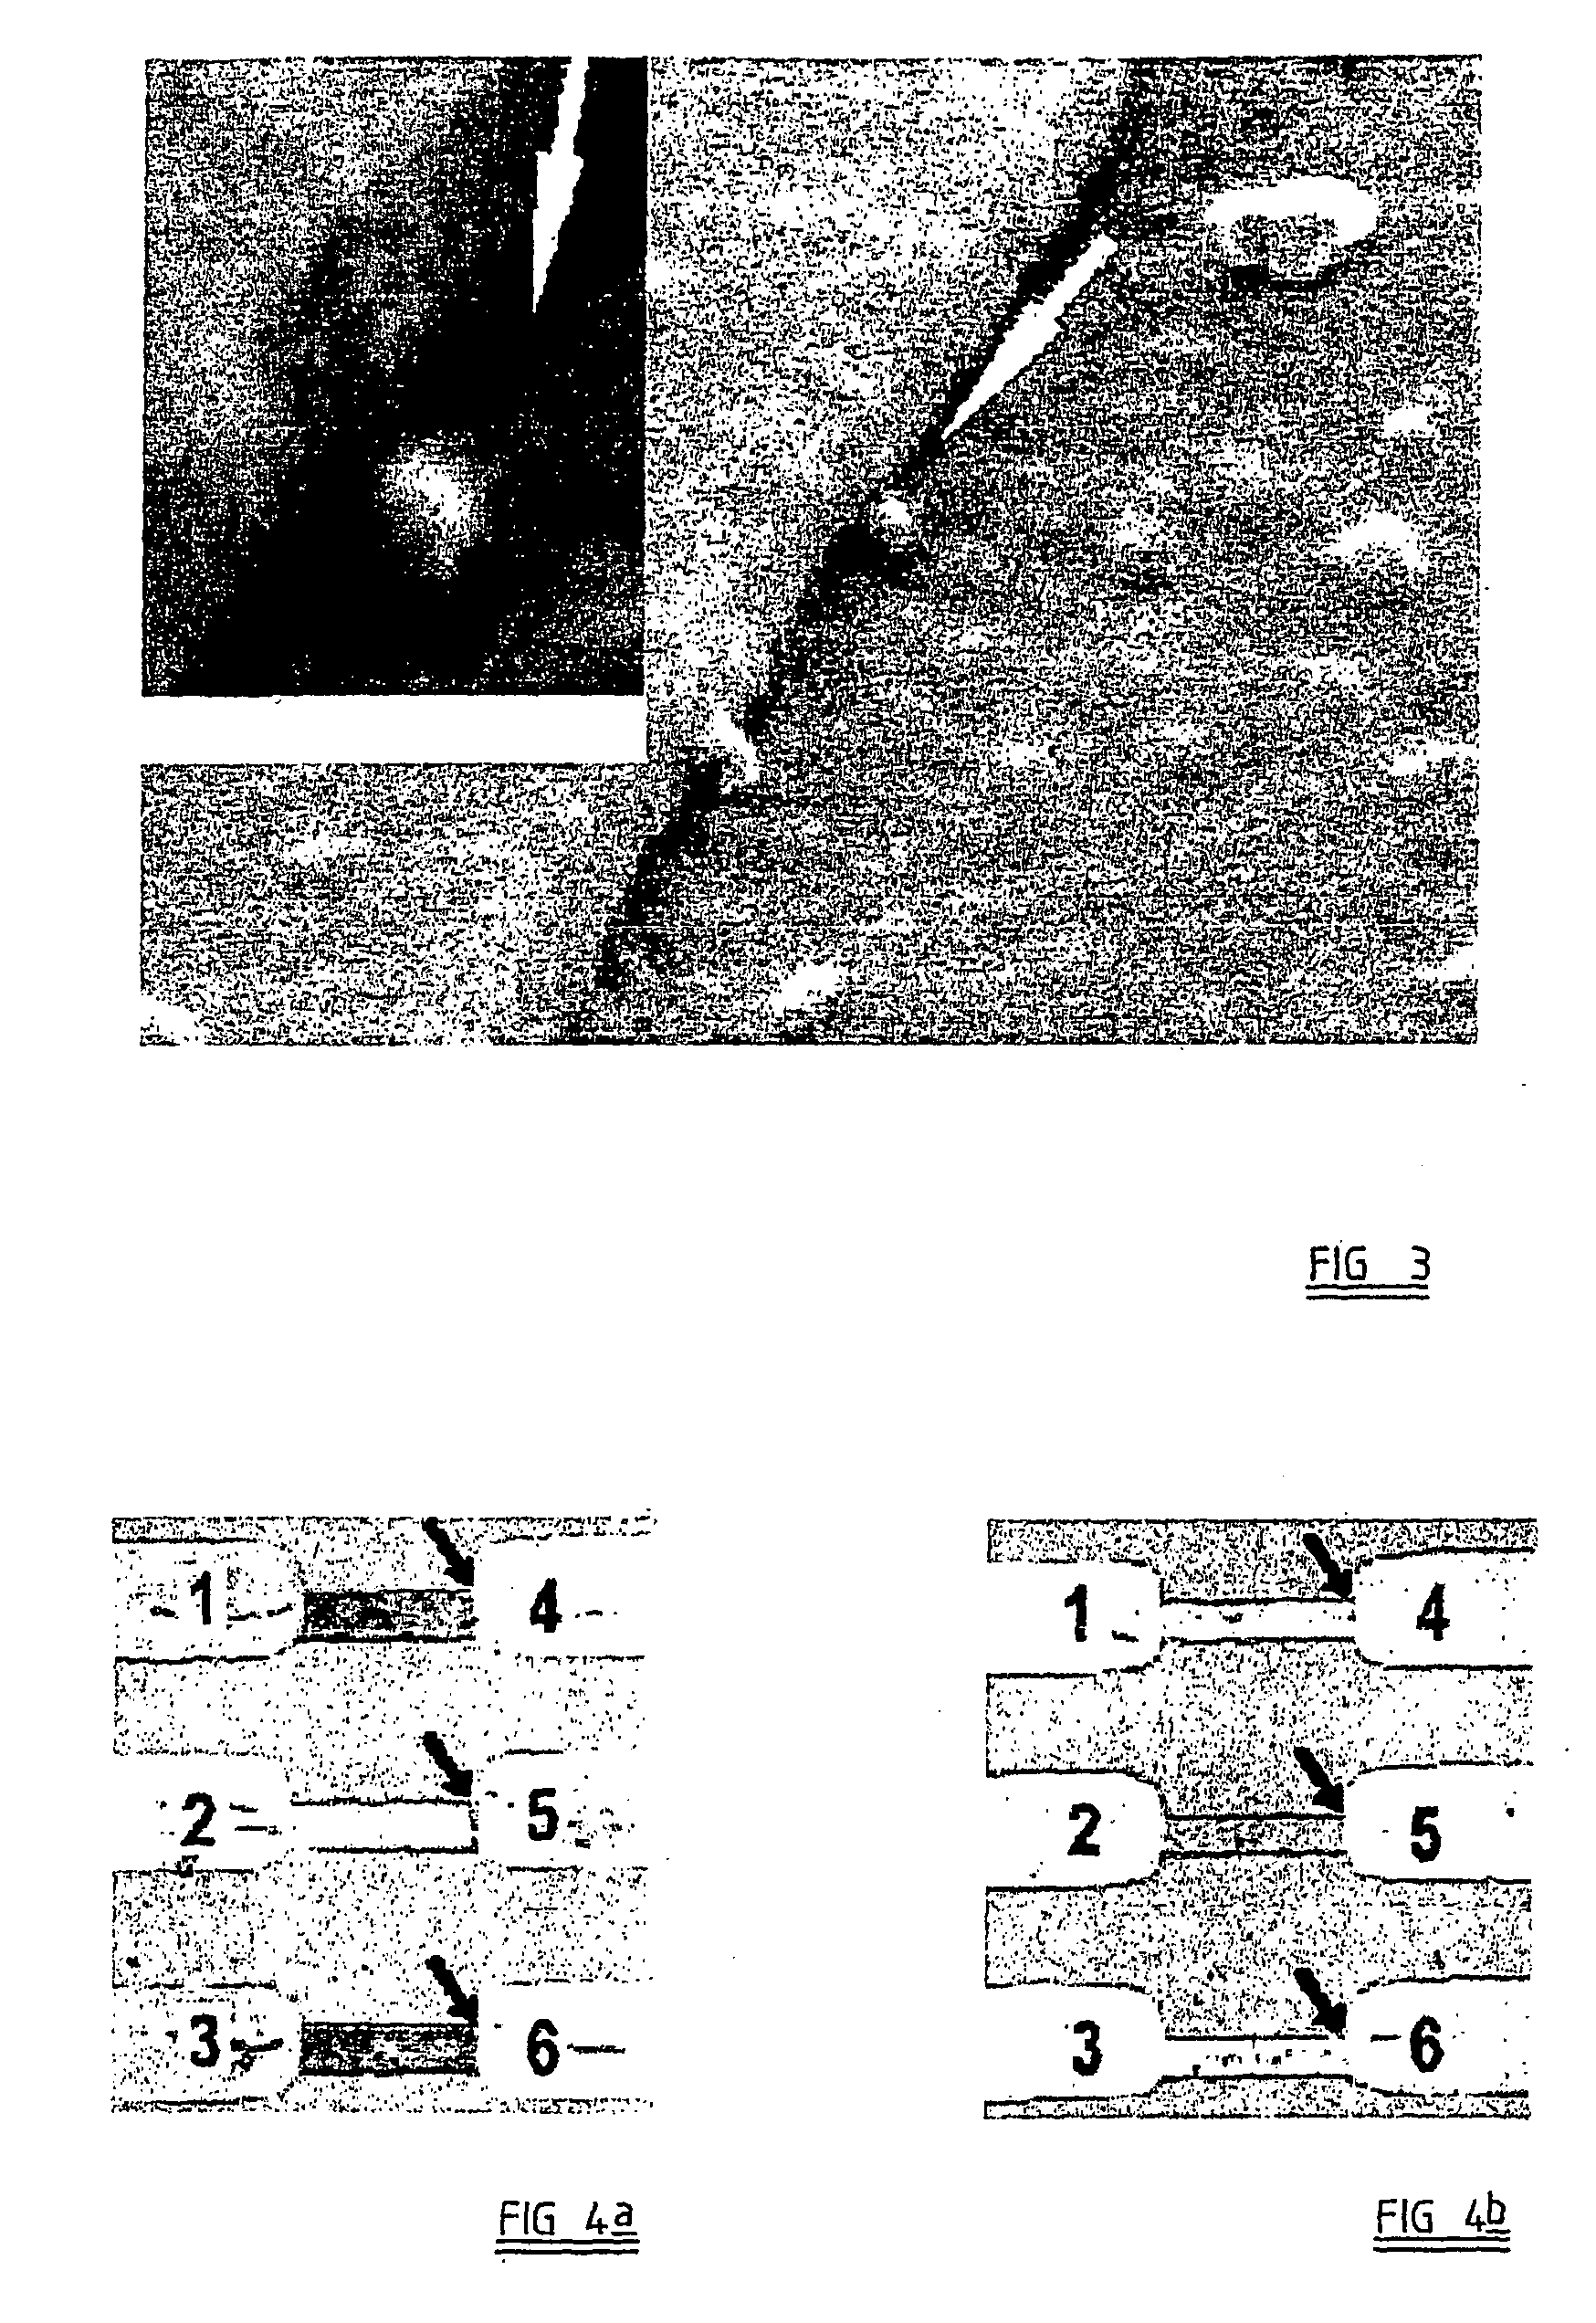 Arrays of electrodes coated with molecules and their production